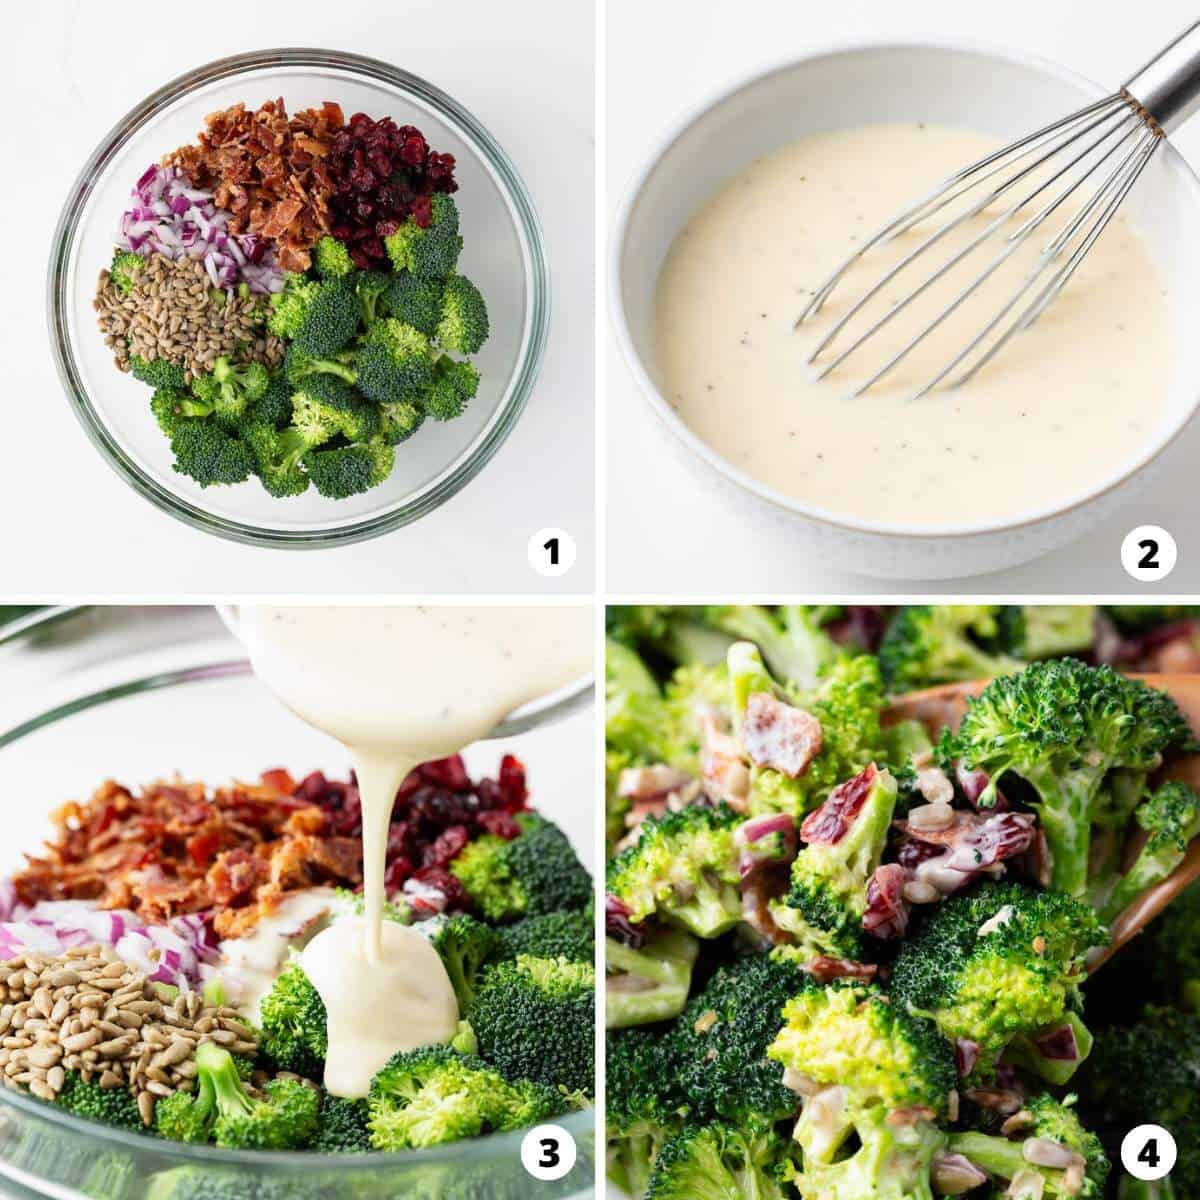 Showing how to make broccoli salad in a 4 step collage.